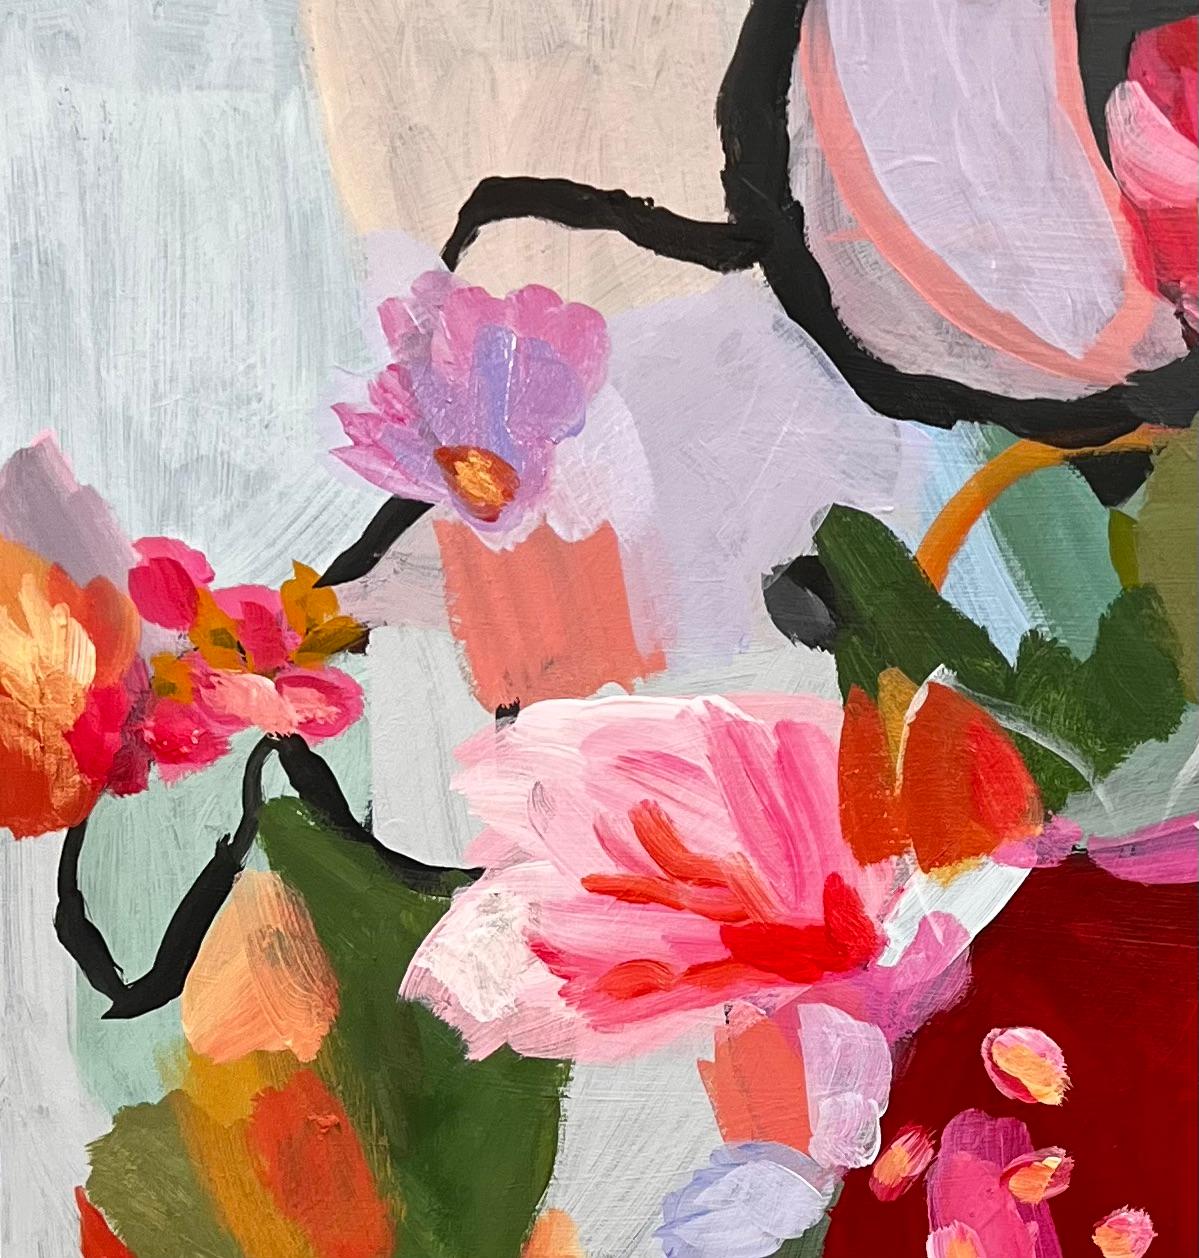 ‘Gertrude’ is an original abstract painting on board by contemporary artist Wendi Weller. Oil pastel mark making details are added to many layers of acrylic paint: “These paintings are inspired by my garden and named after strong Shakespearean